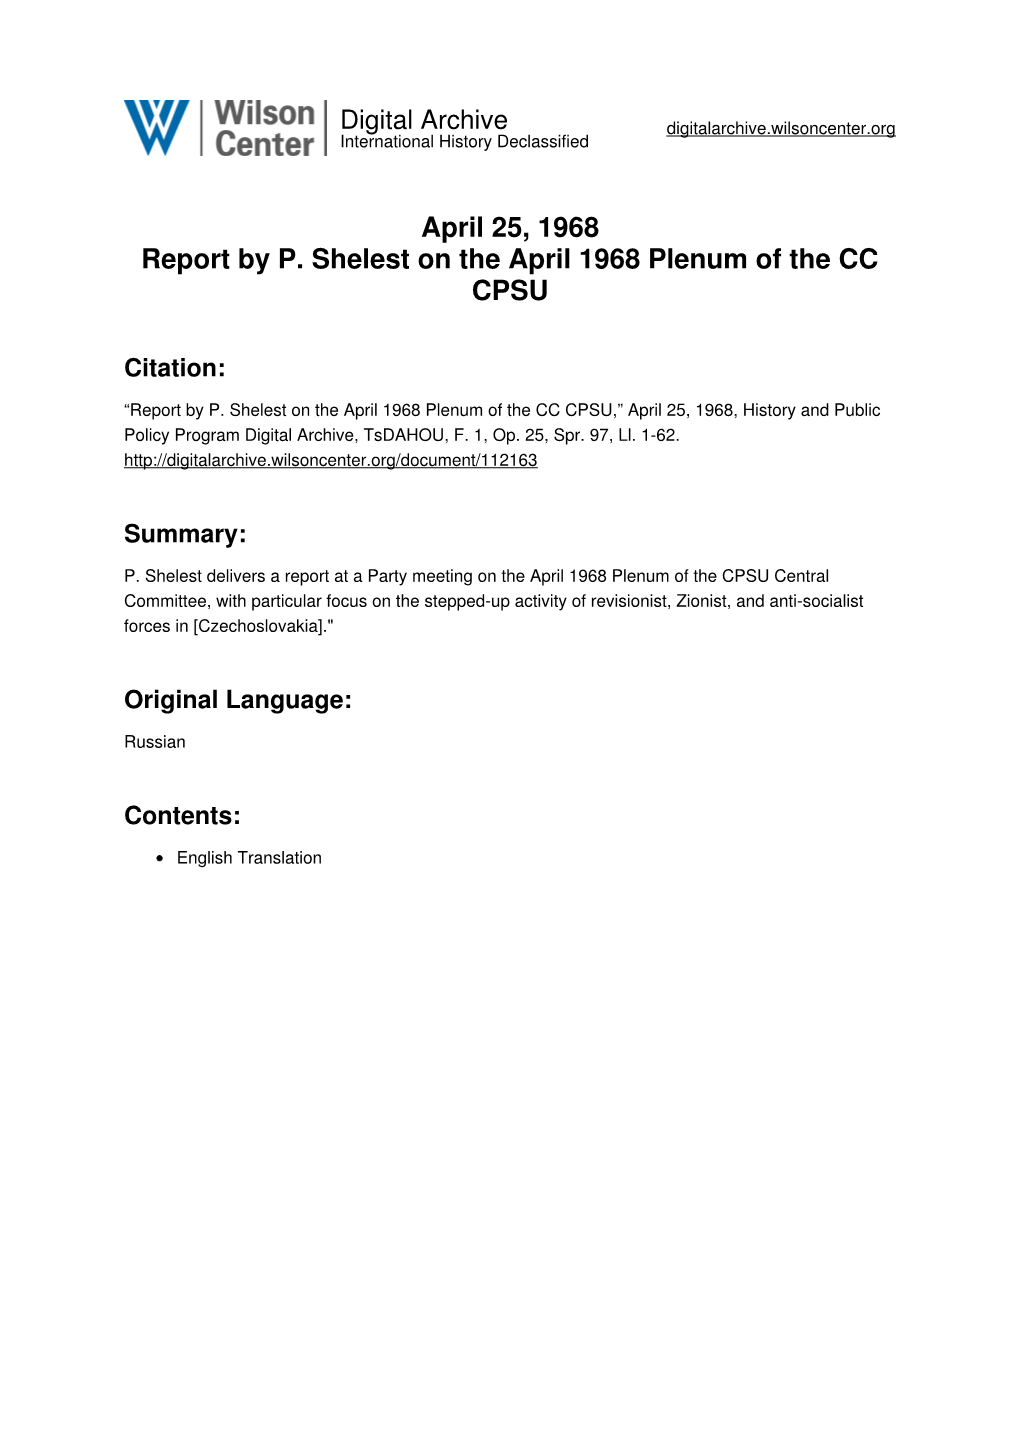 April 25, 1968 Report by P. Shelest on the April 1968 Plenum of the CC CPSU